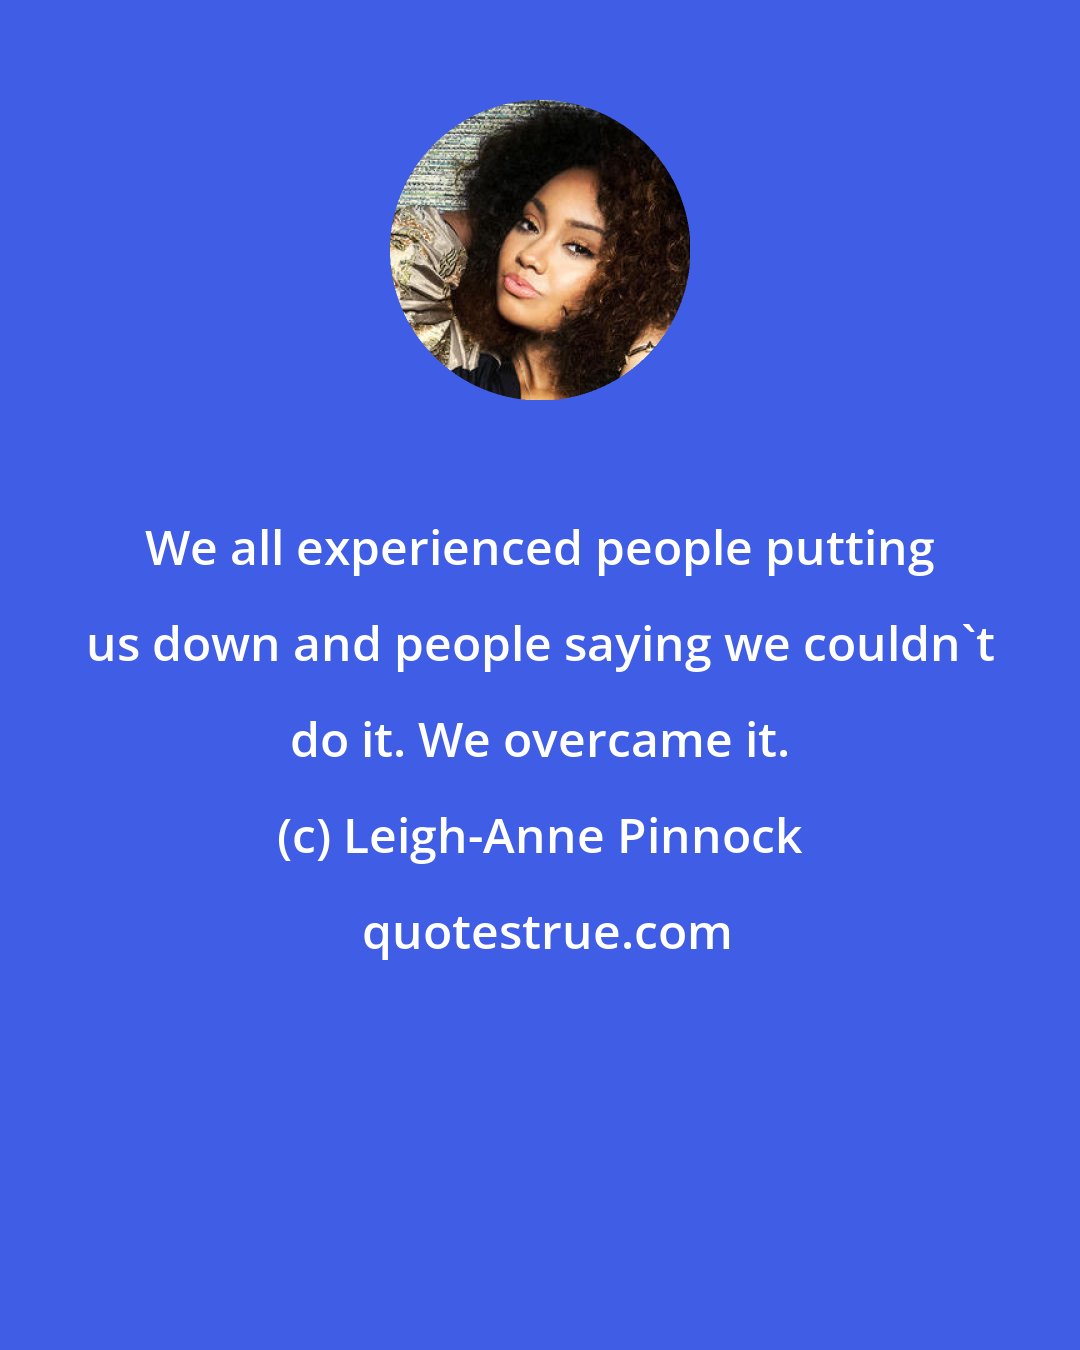 Leigh-Anne Pinnock: We all experienced people putting us down and people saying we couldn't do it. We overcame it.